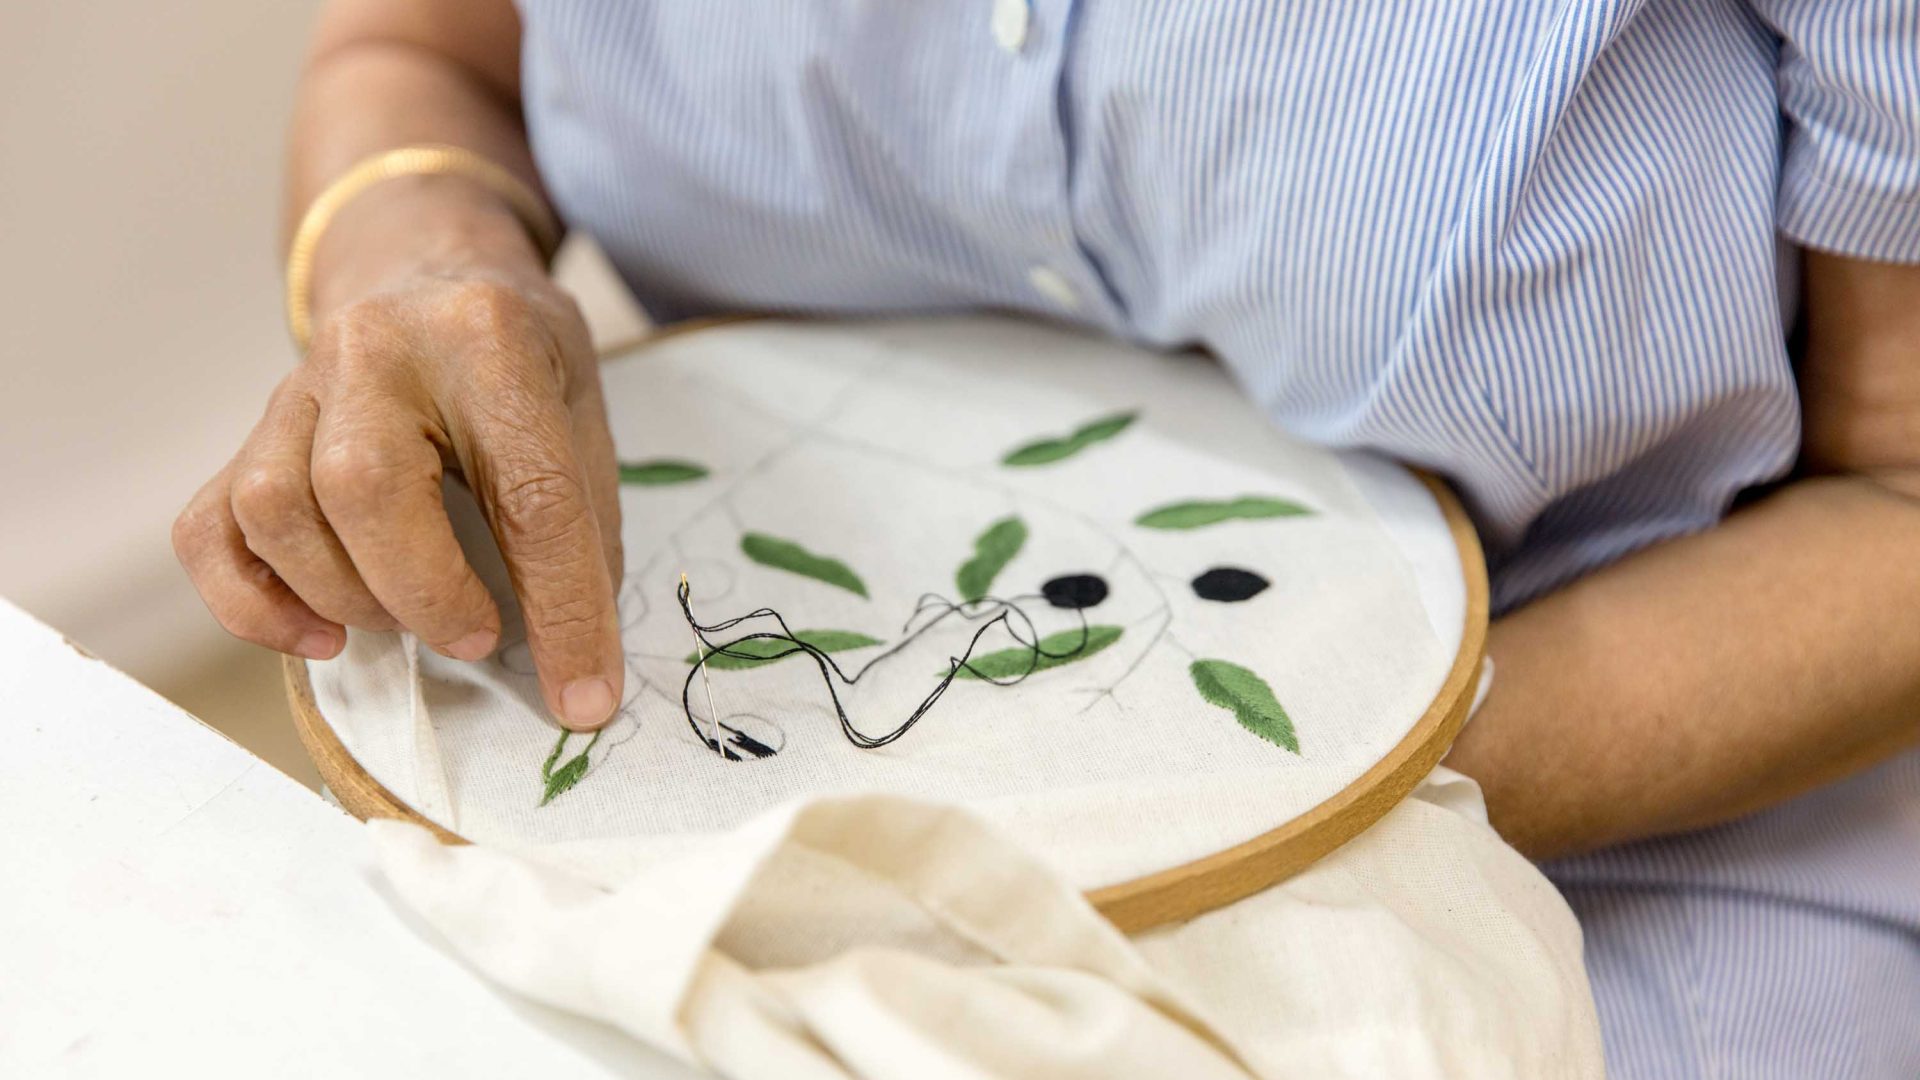 A close up of an older woman's hands embroidering.